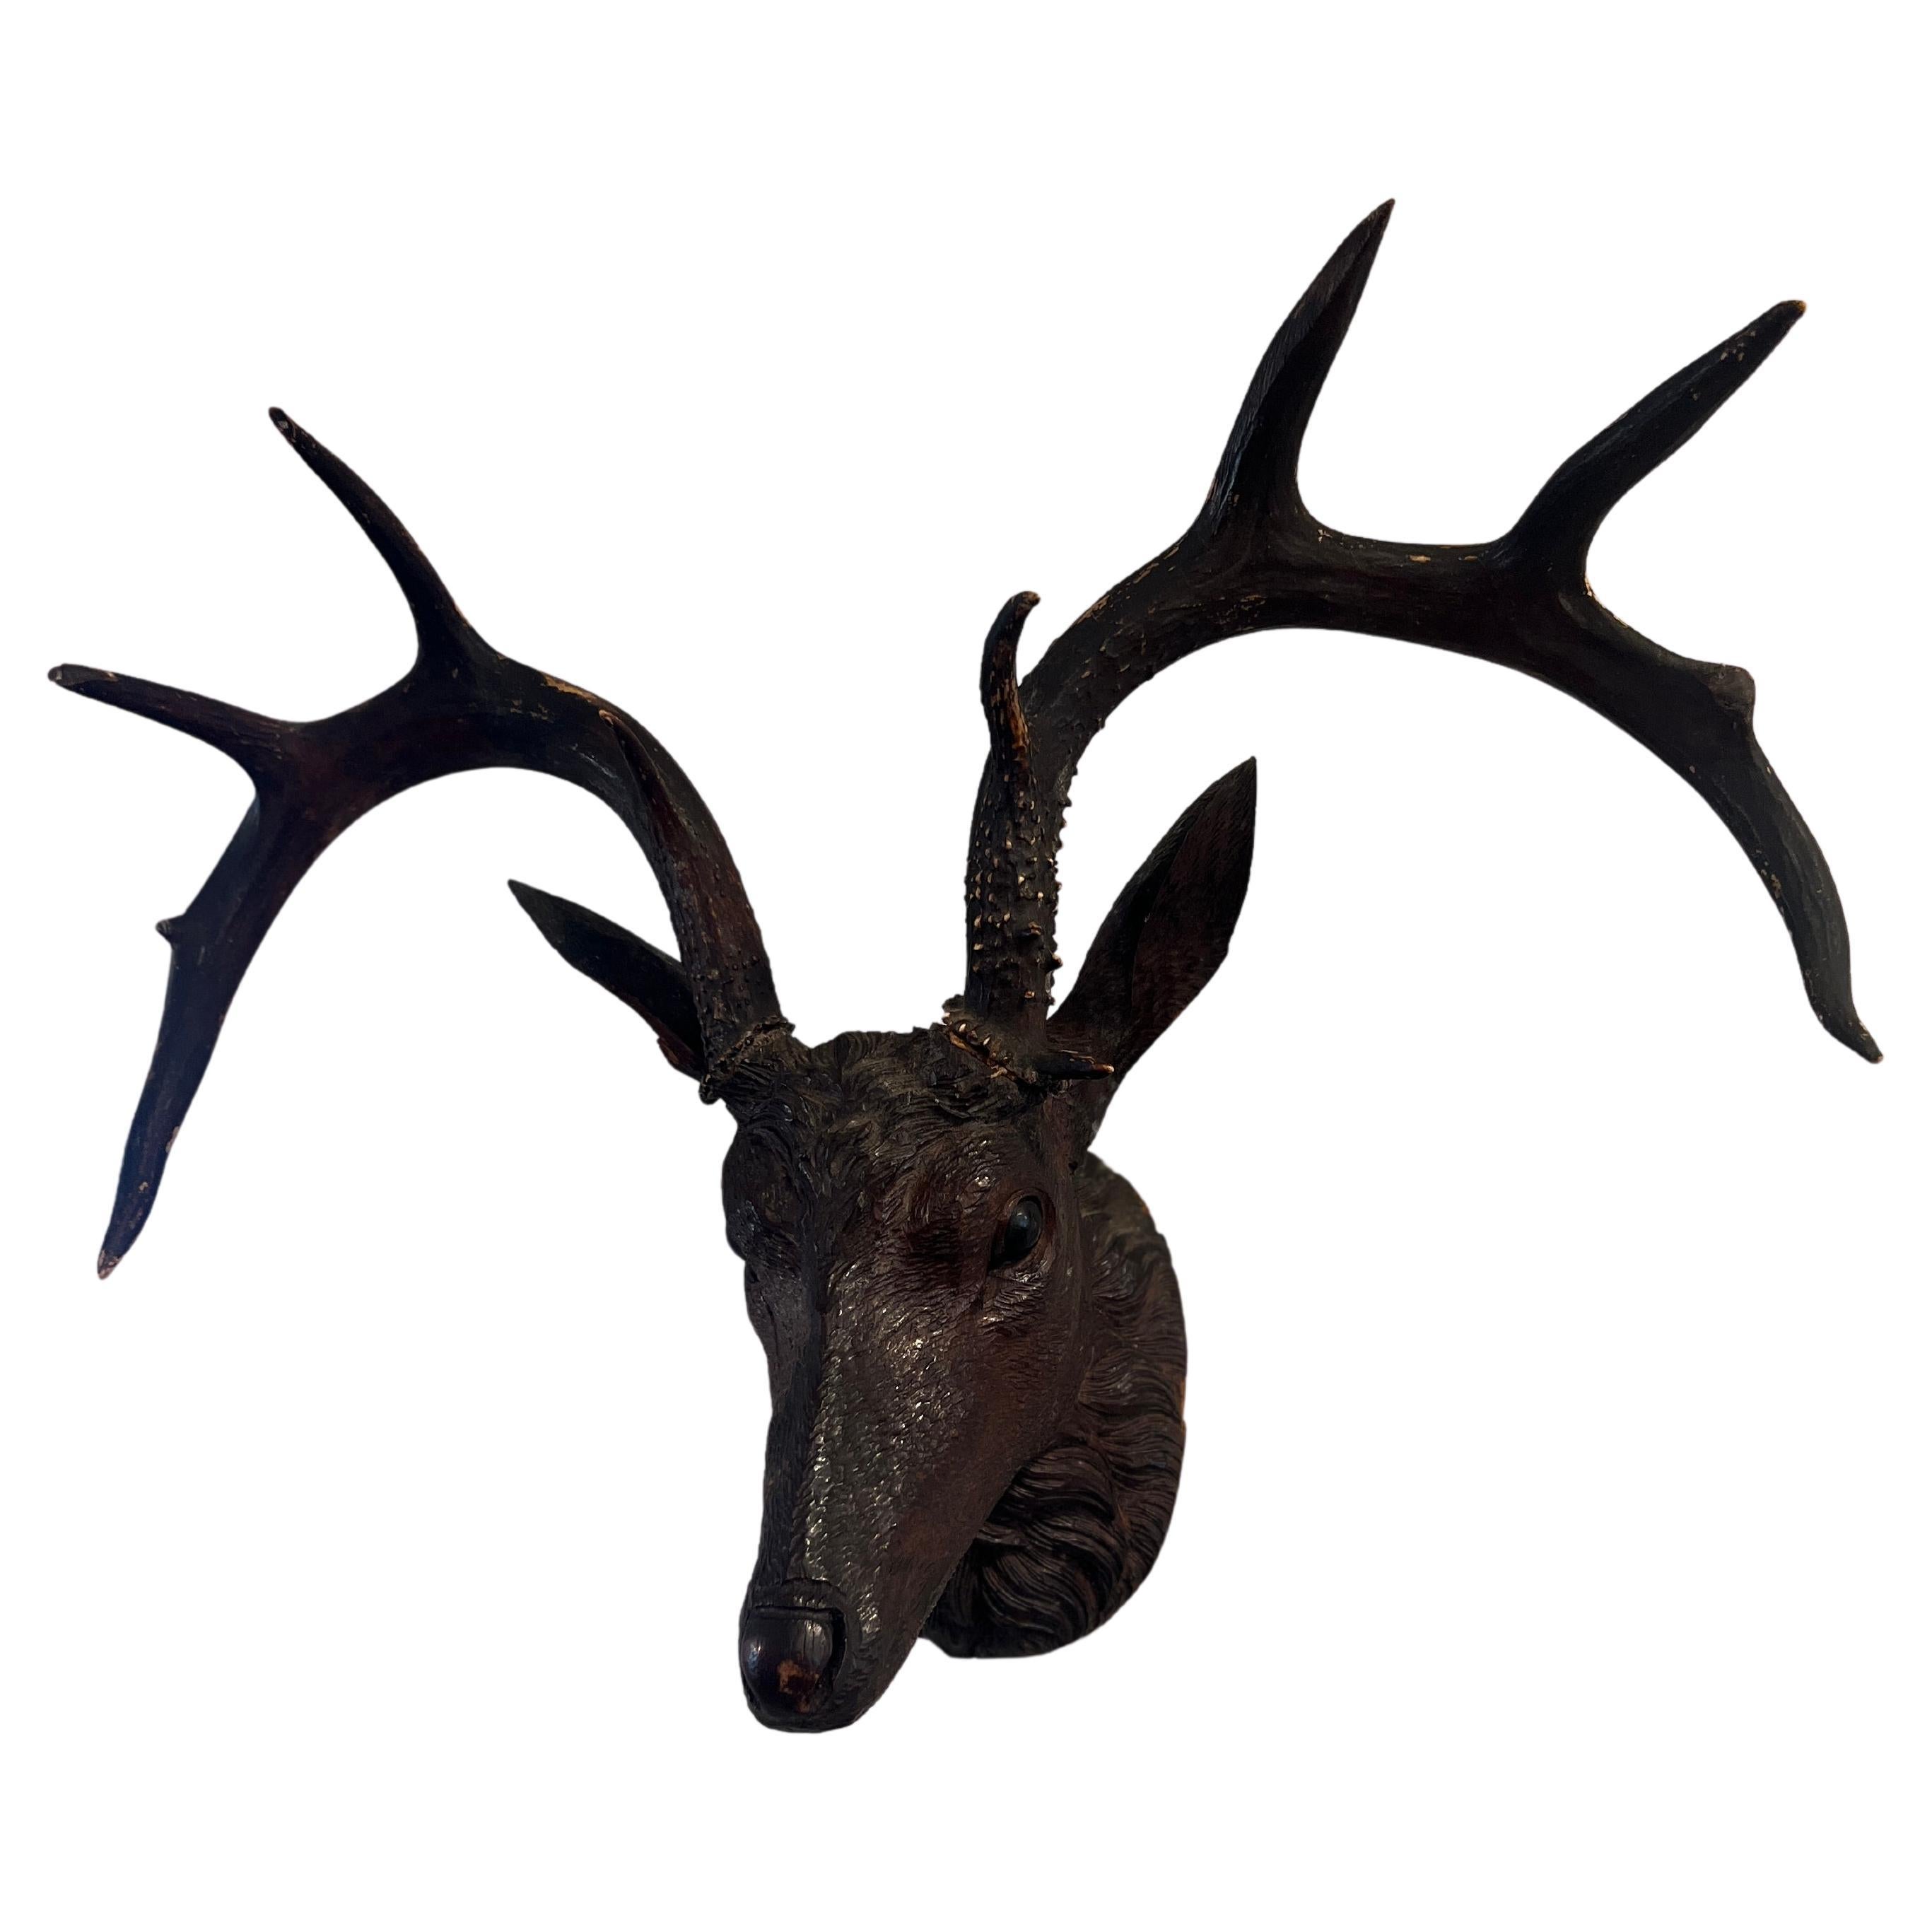 19th C Black Forest Stag Head Antler Wall Mount Deer Sculpture For Sale